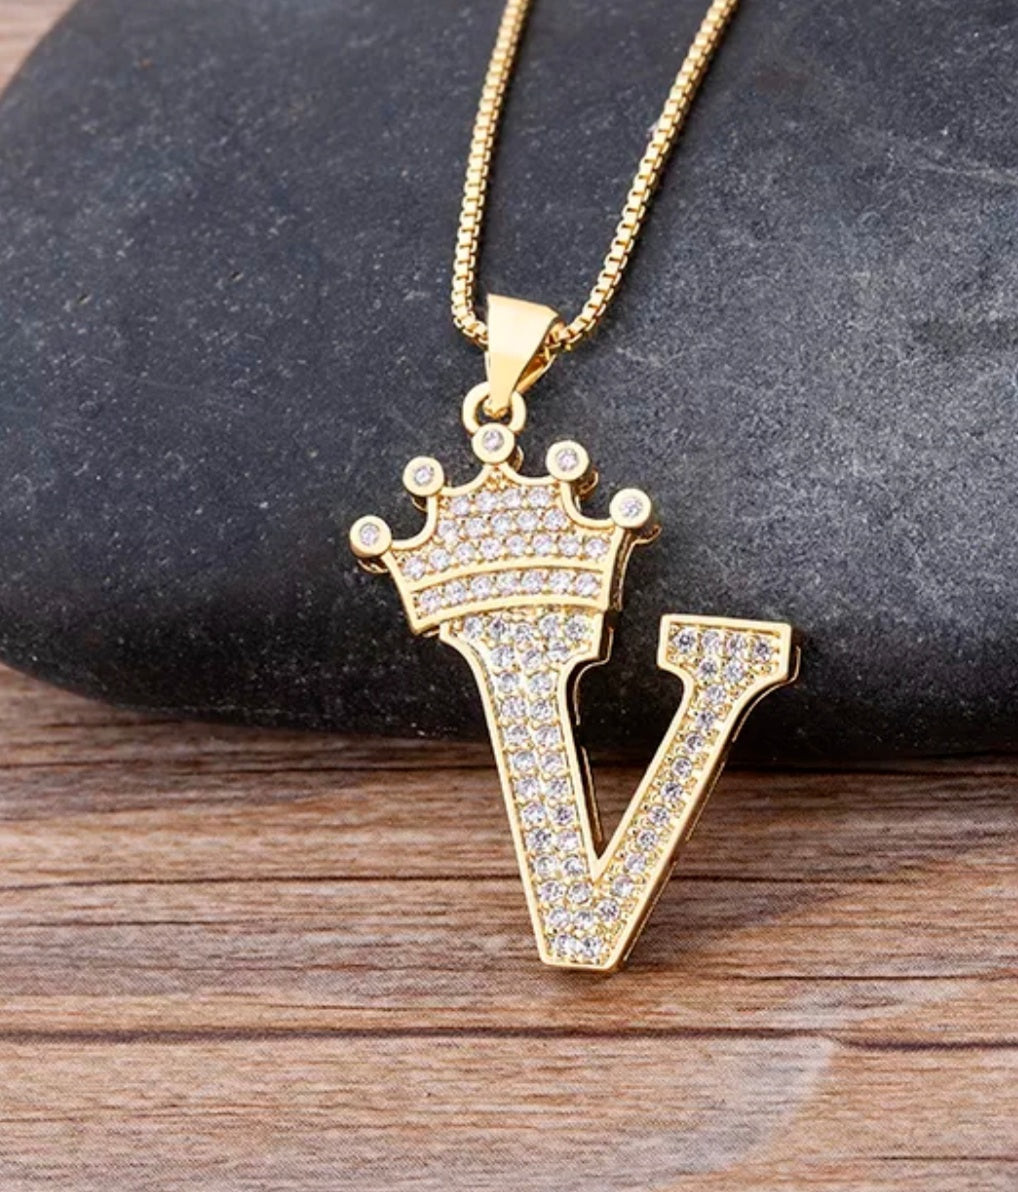 Forever a Queen Initial Necklace